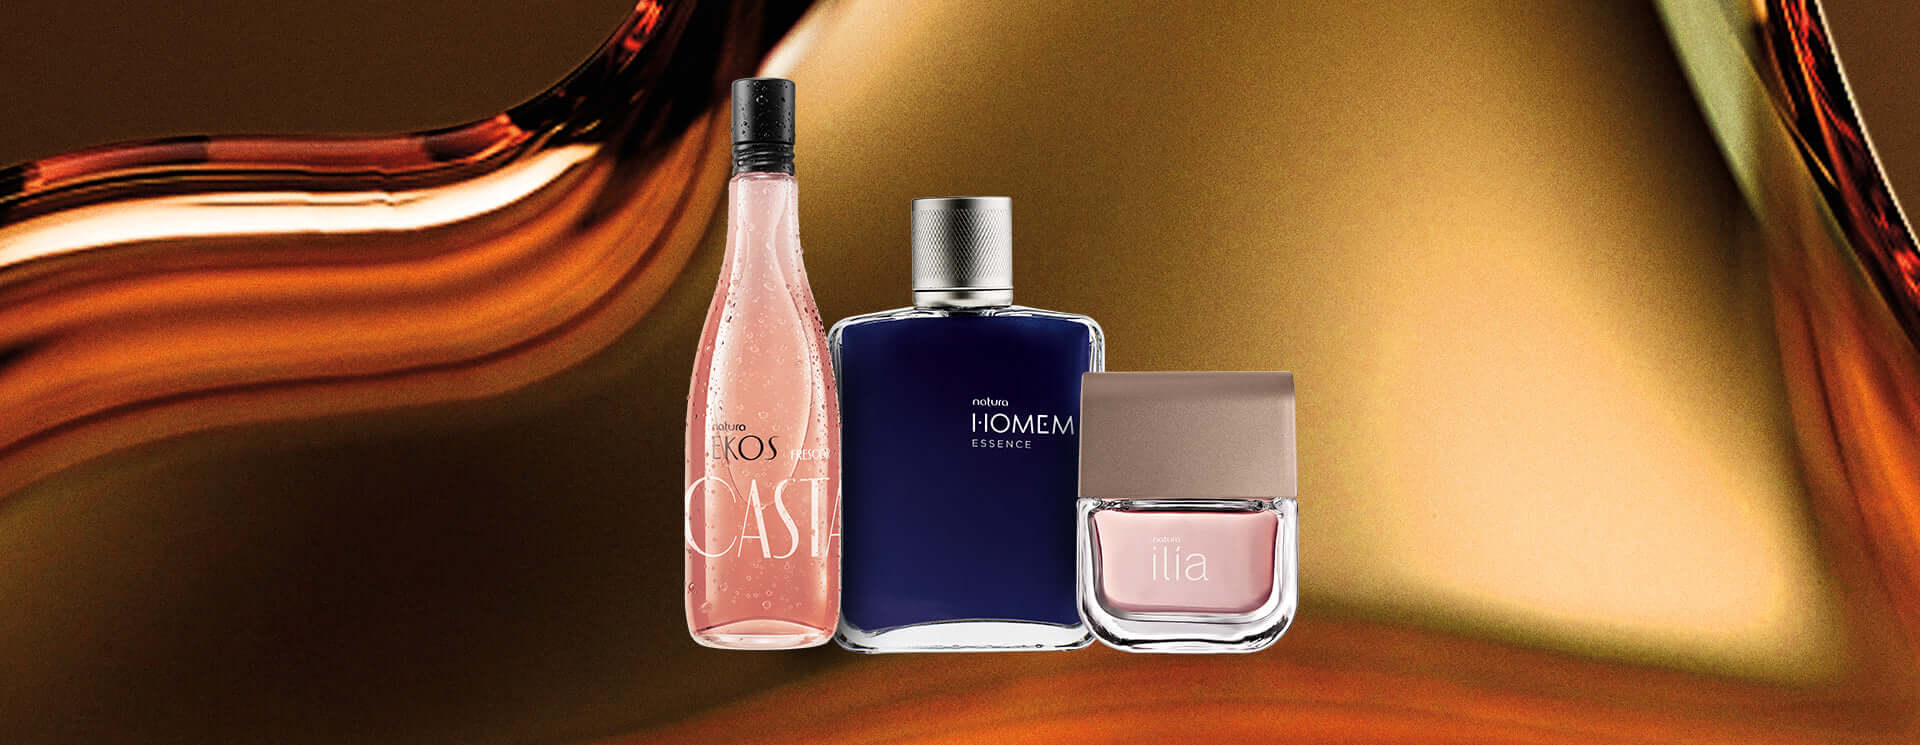 3 Distinguished Fragrances, and a World of Possibilities